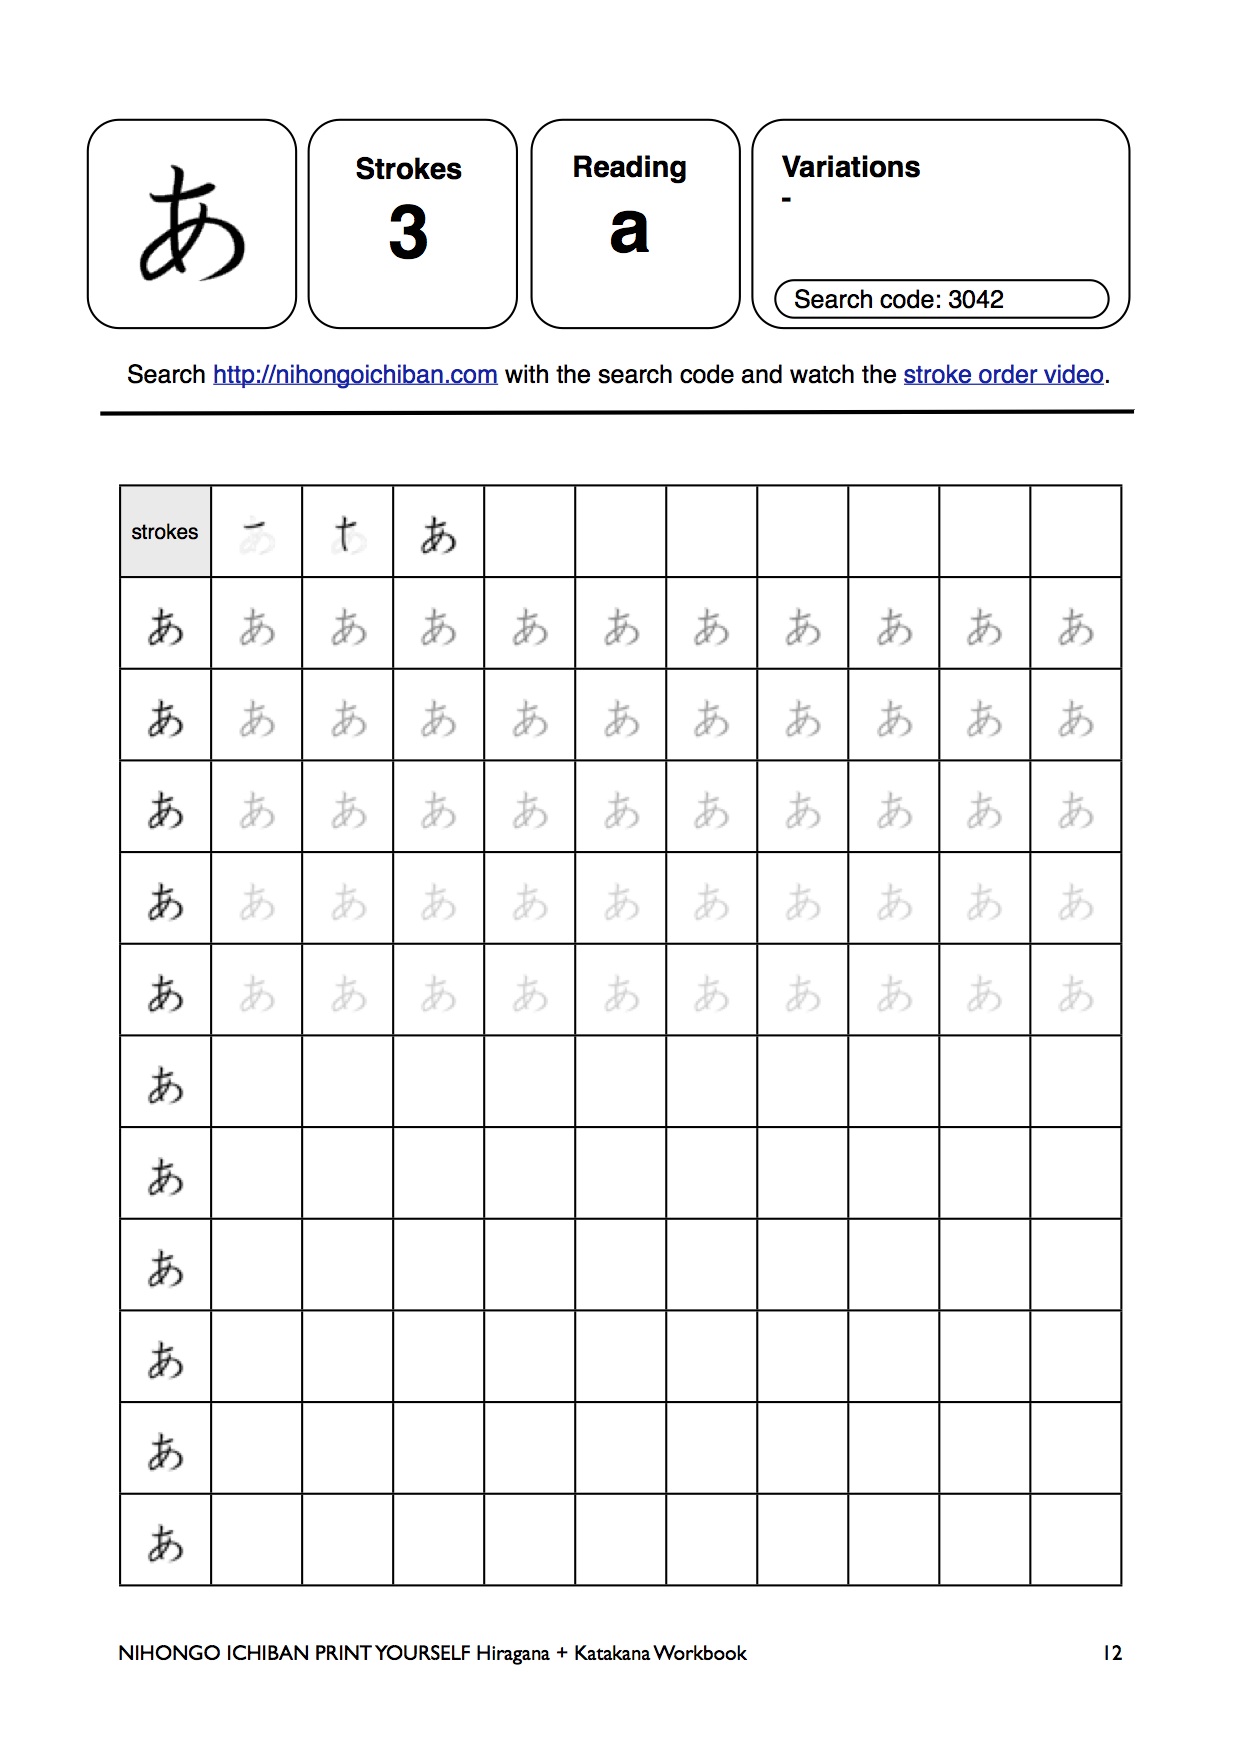 Learning Japanese Hiragana And Katakana Workbook And Practice Sheets Pdf Learn Japanese In Chinese